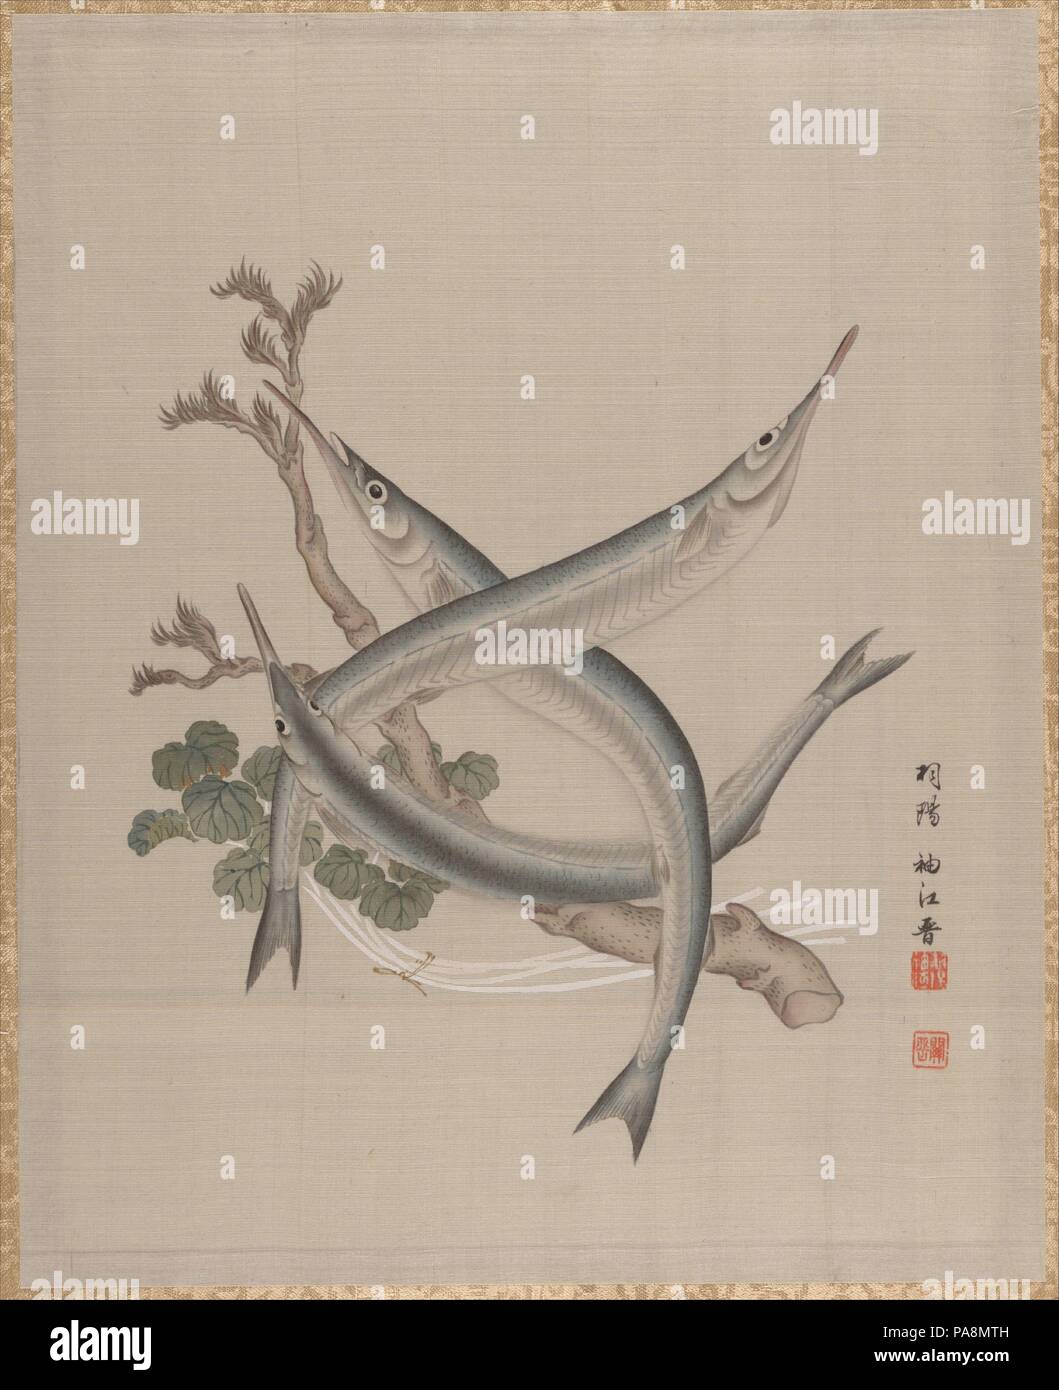 Three Fishes and a Branch. Artist: Seki Shuko (Japanese, 1858-1915). Culture: Japan. Dimensions: 13 1/2 x 10 7/8 in. (34.3 x 27.6 cm). Date: ca. 1890-92. Museum: Metropolitan Museum of Art, New York, USA. Stock Photo